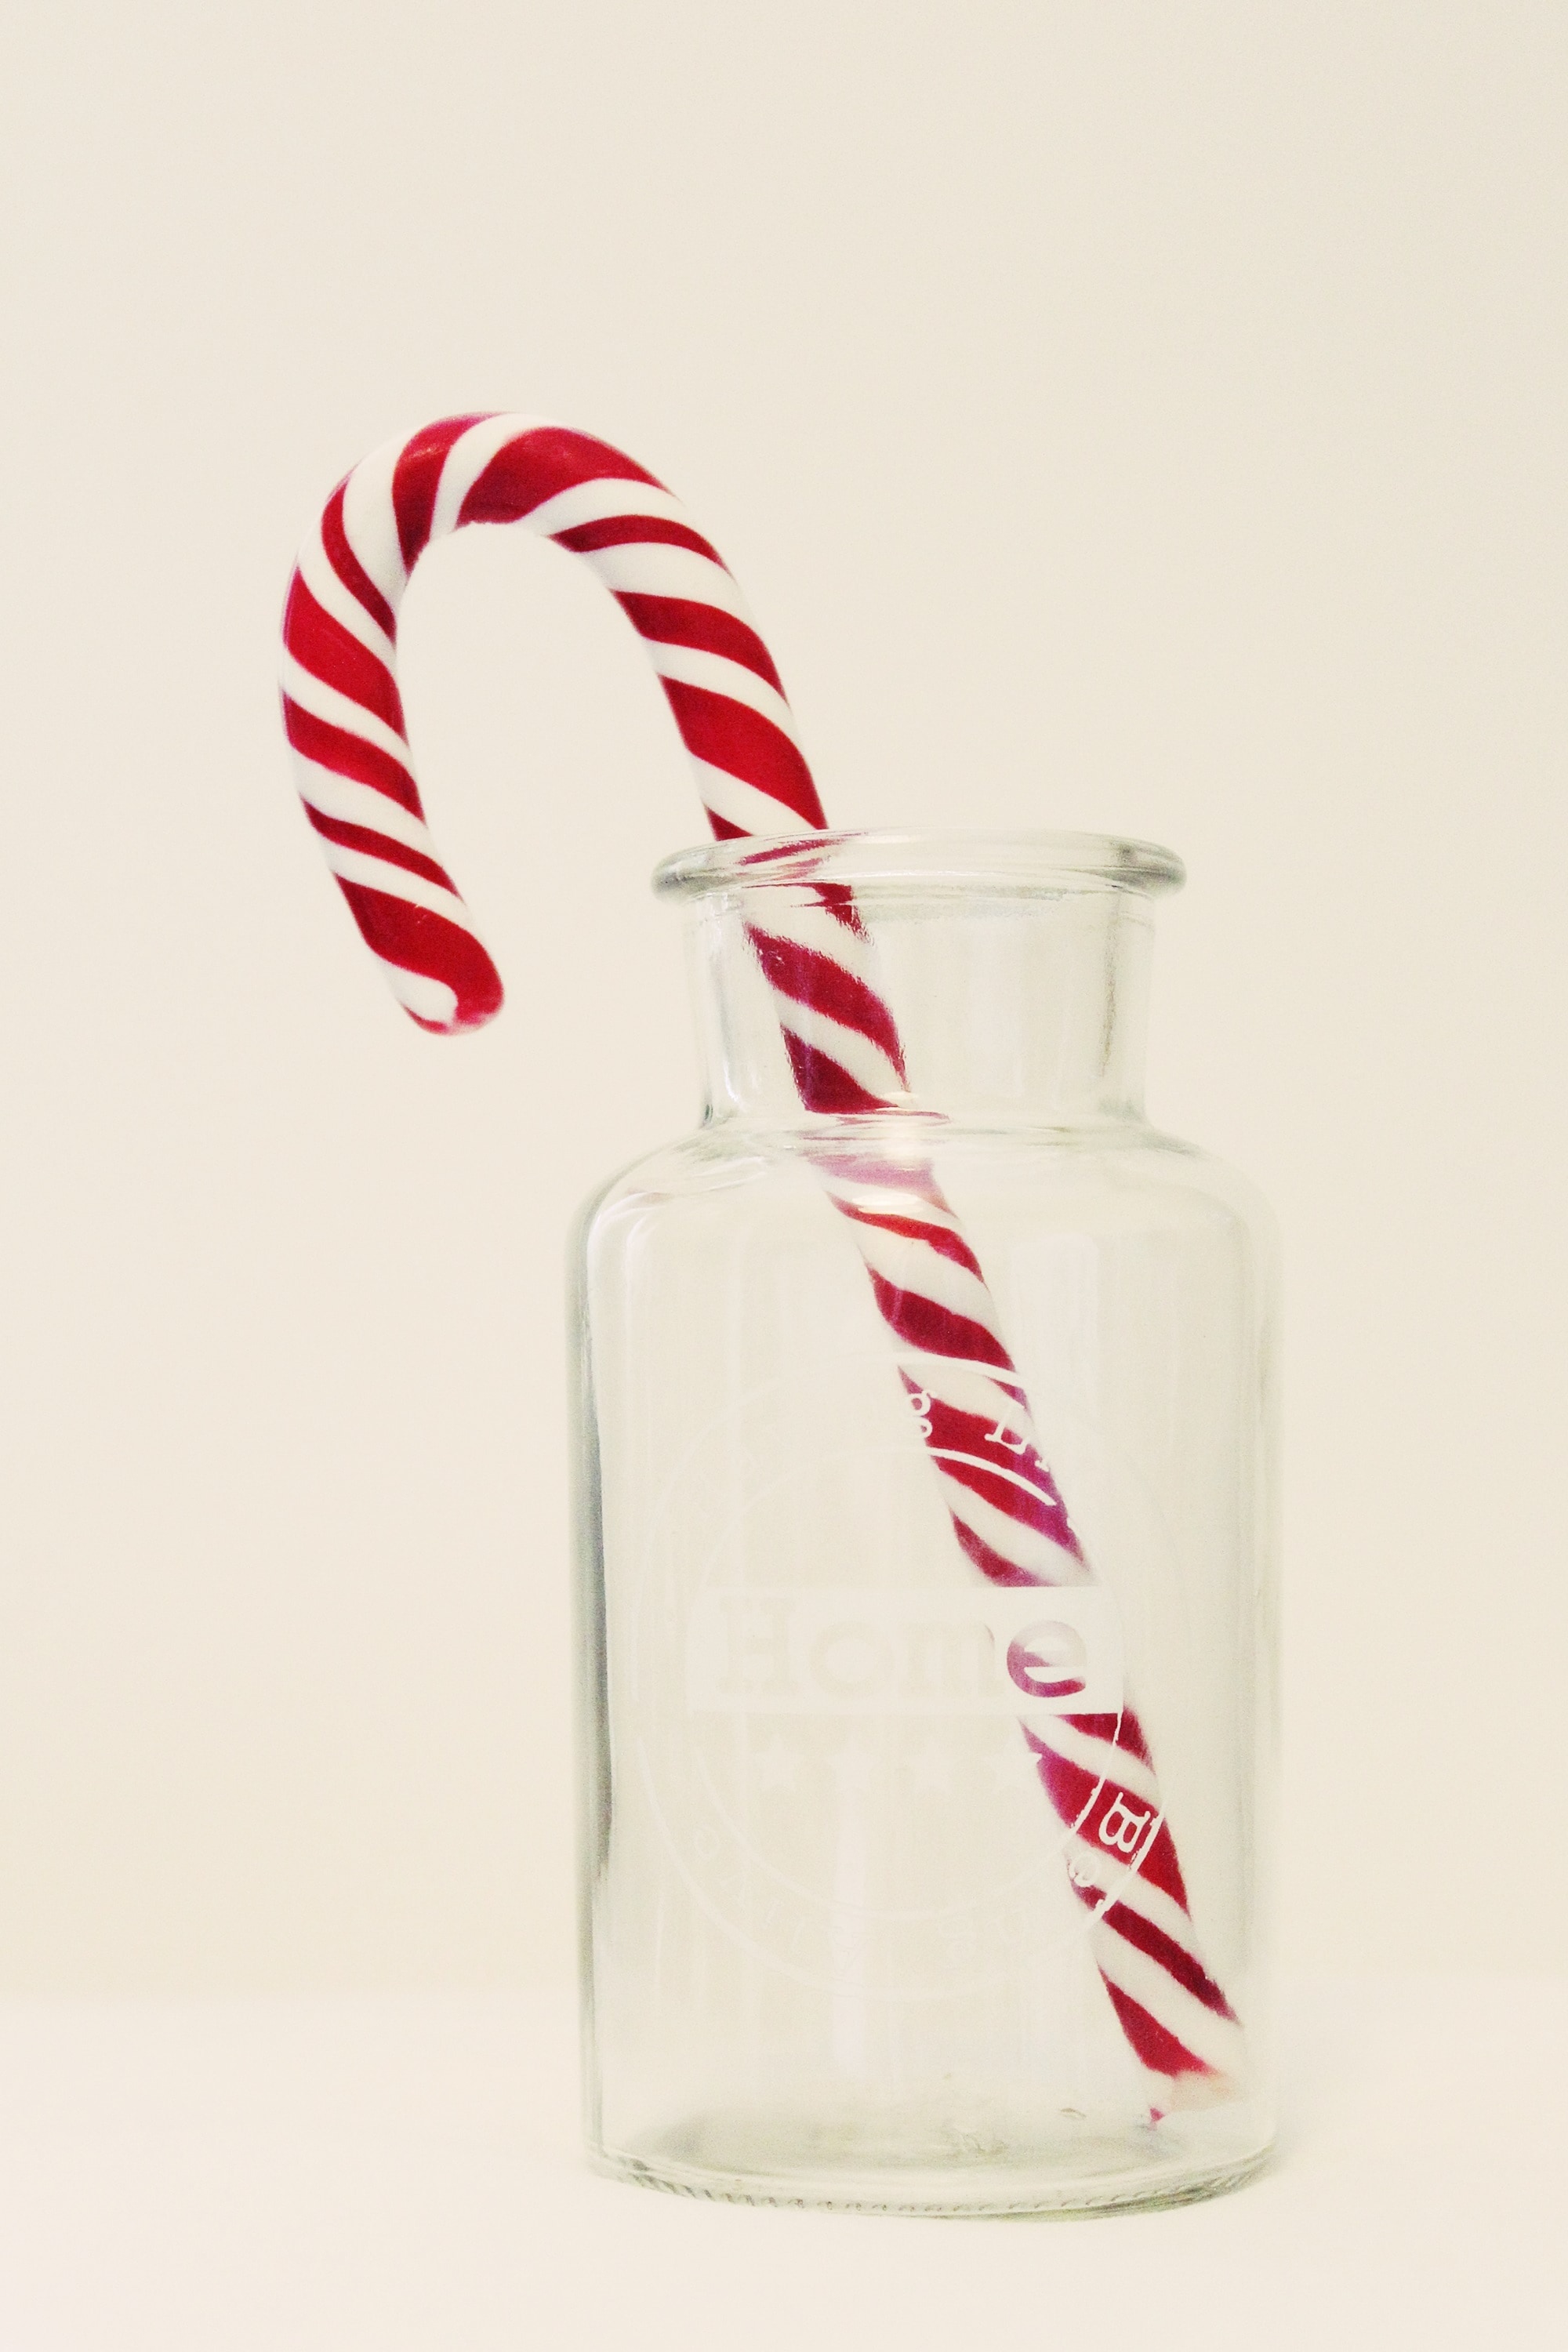 red and white candy cane and clear glass bottle